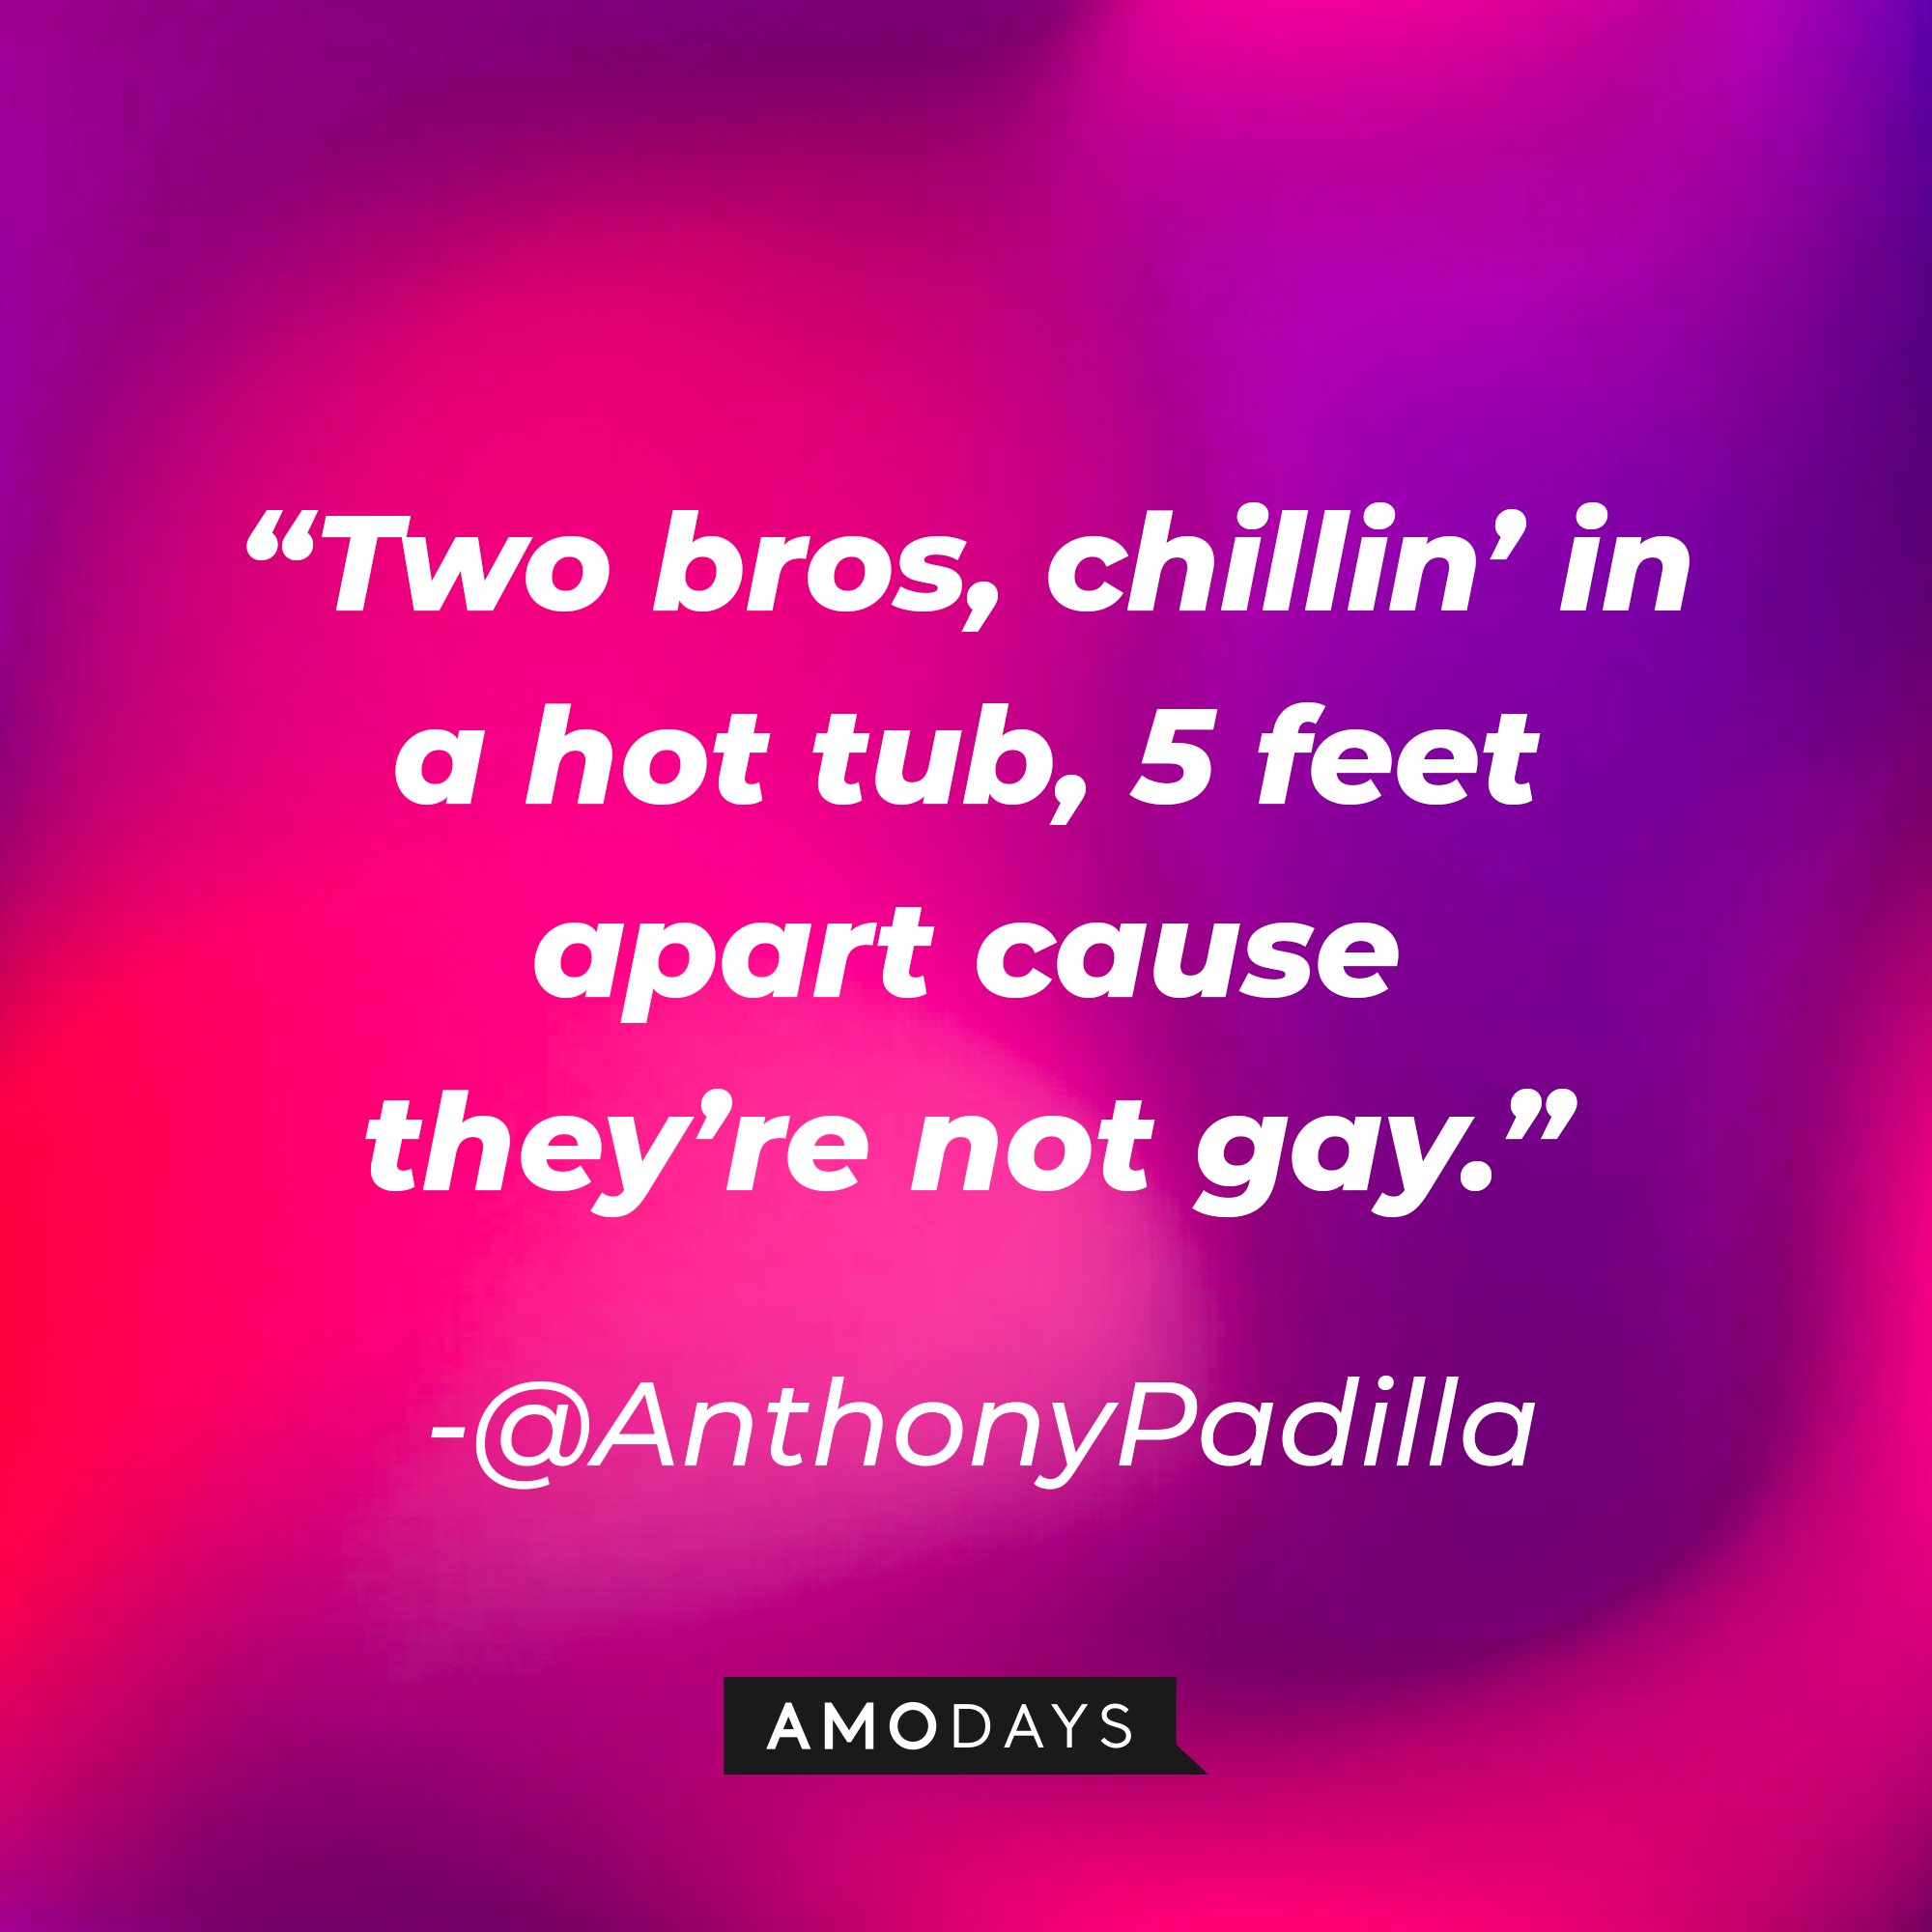 @AnthonyPadilla's quote: “Two bros, chillin’ in a hot tub, 5 feet apart cause they’re not gay.” | Image: AmoDays